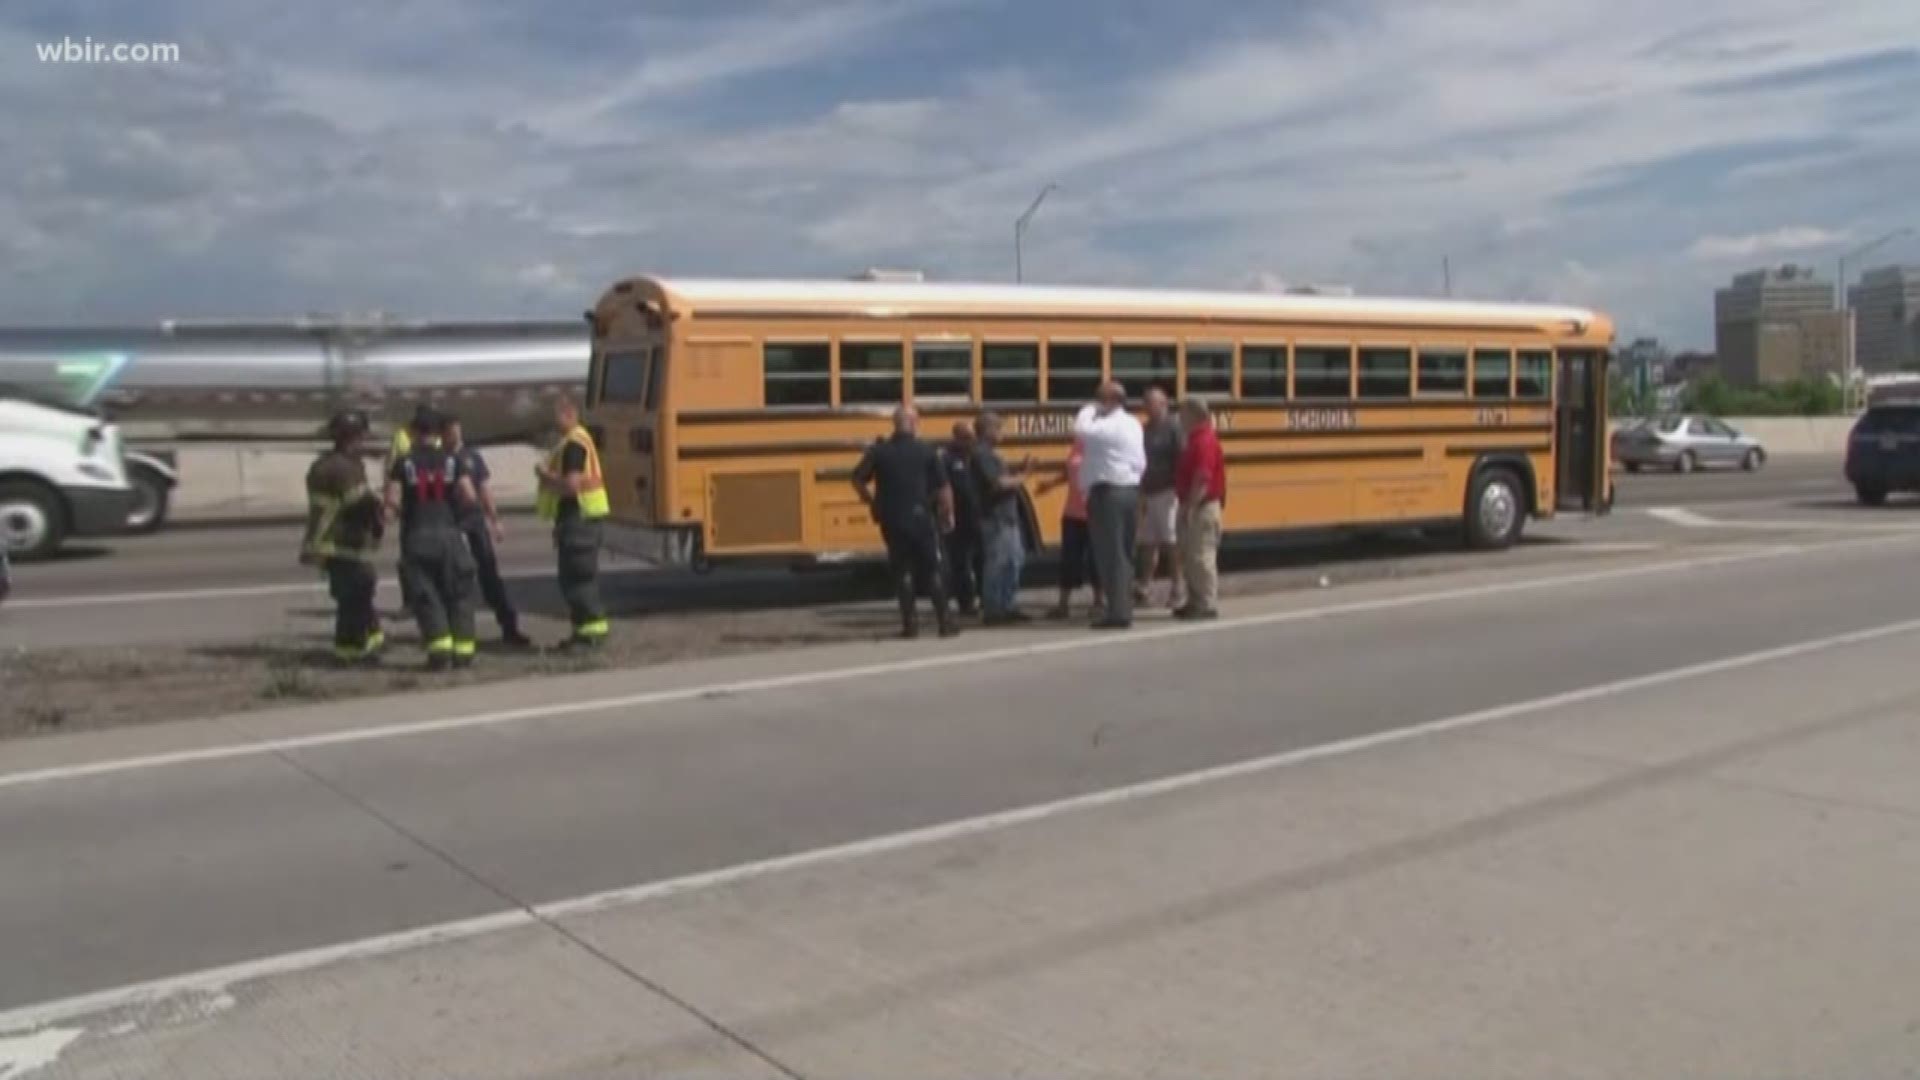 The bus, from Hamilton County, pulled over safely and the driver evacuated the kids.